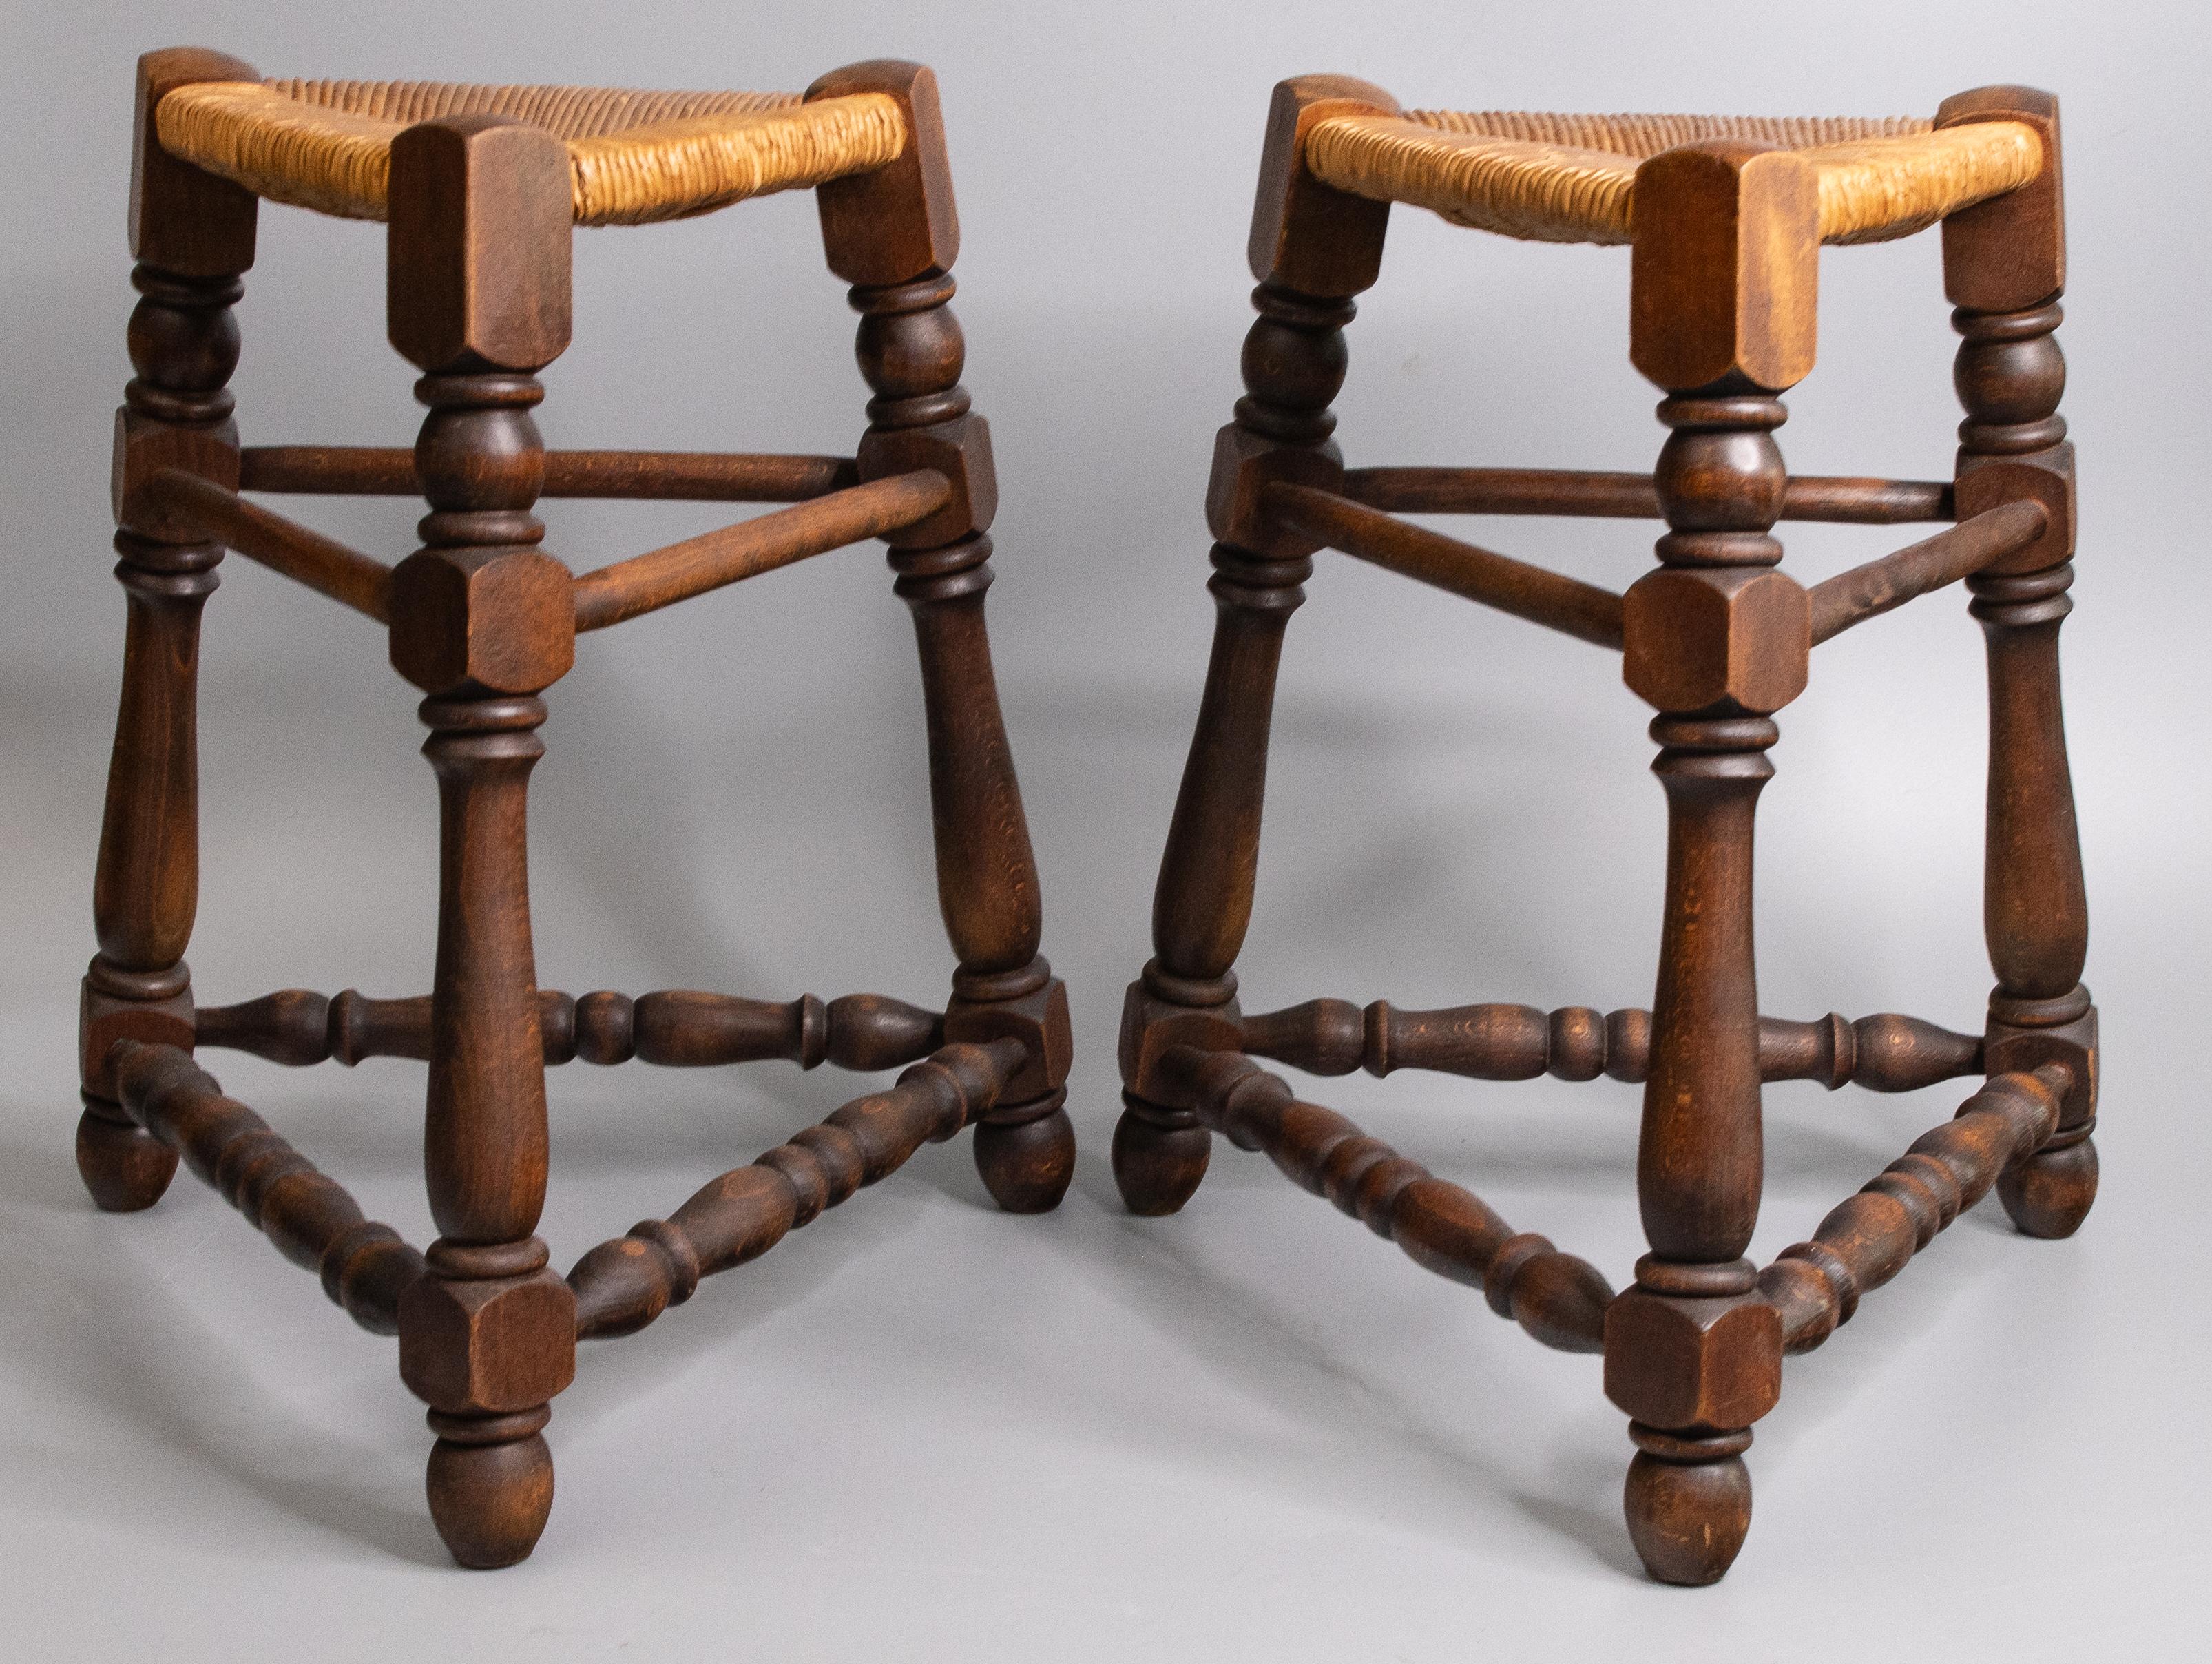 A fine pair of antique French oak tripod stools with woven rush seats, circa 1900. These charming stools are a stylish triangular shape, solid and sturdy, with hand turned legs and stretchers in a lovely patina. A rare find!

DIMENSIONS
16ʺW × 16ʺD